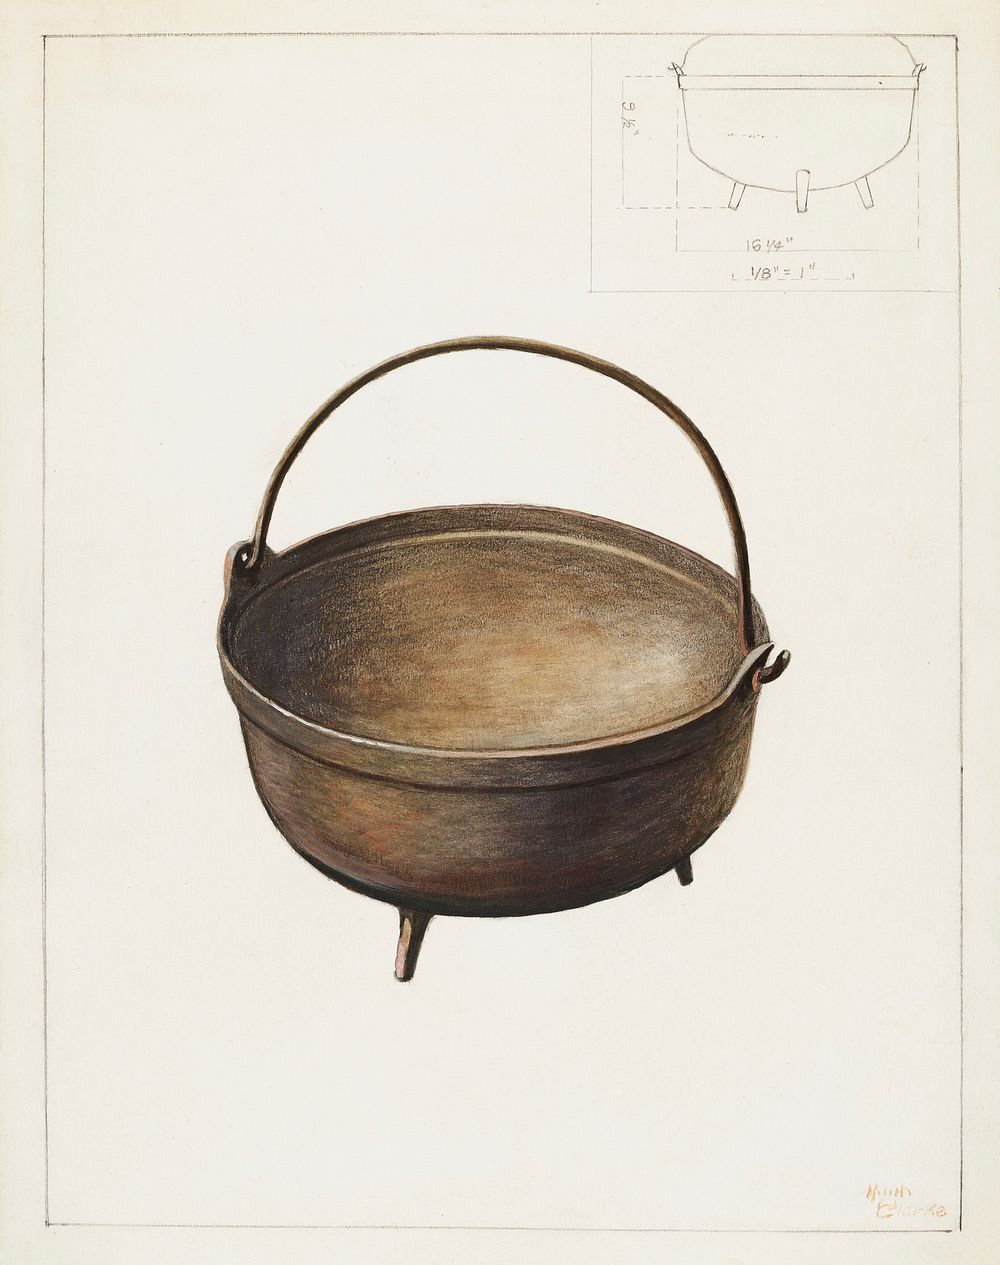 Fireplace Kettle (ca. 1936) by Hugh Clarke. Original from The National Gallery of Art. Digitally enhanced by rawpixel.